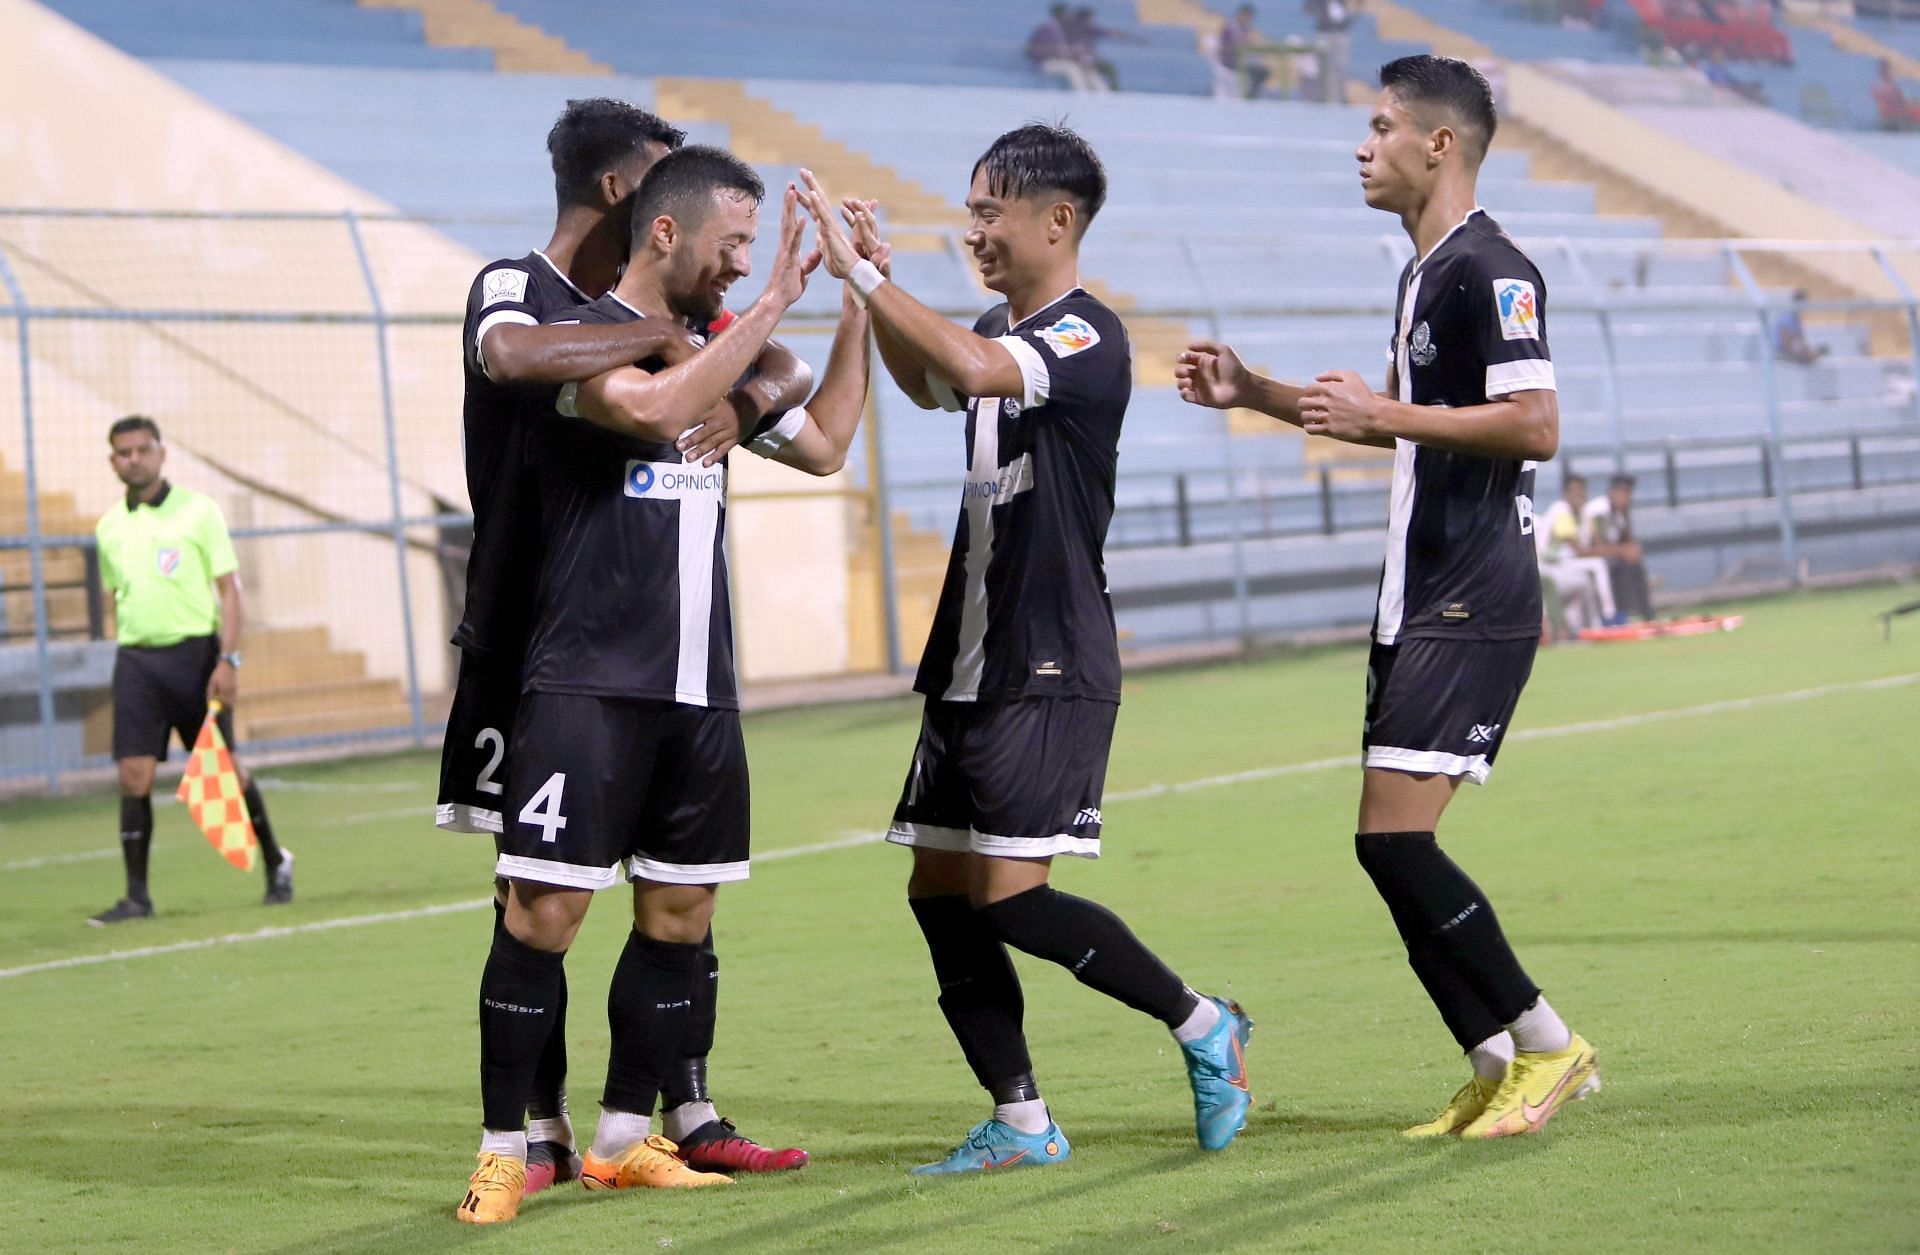 Mohammedan SC Players celebrating after scoring a goal against TRAU